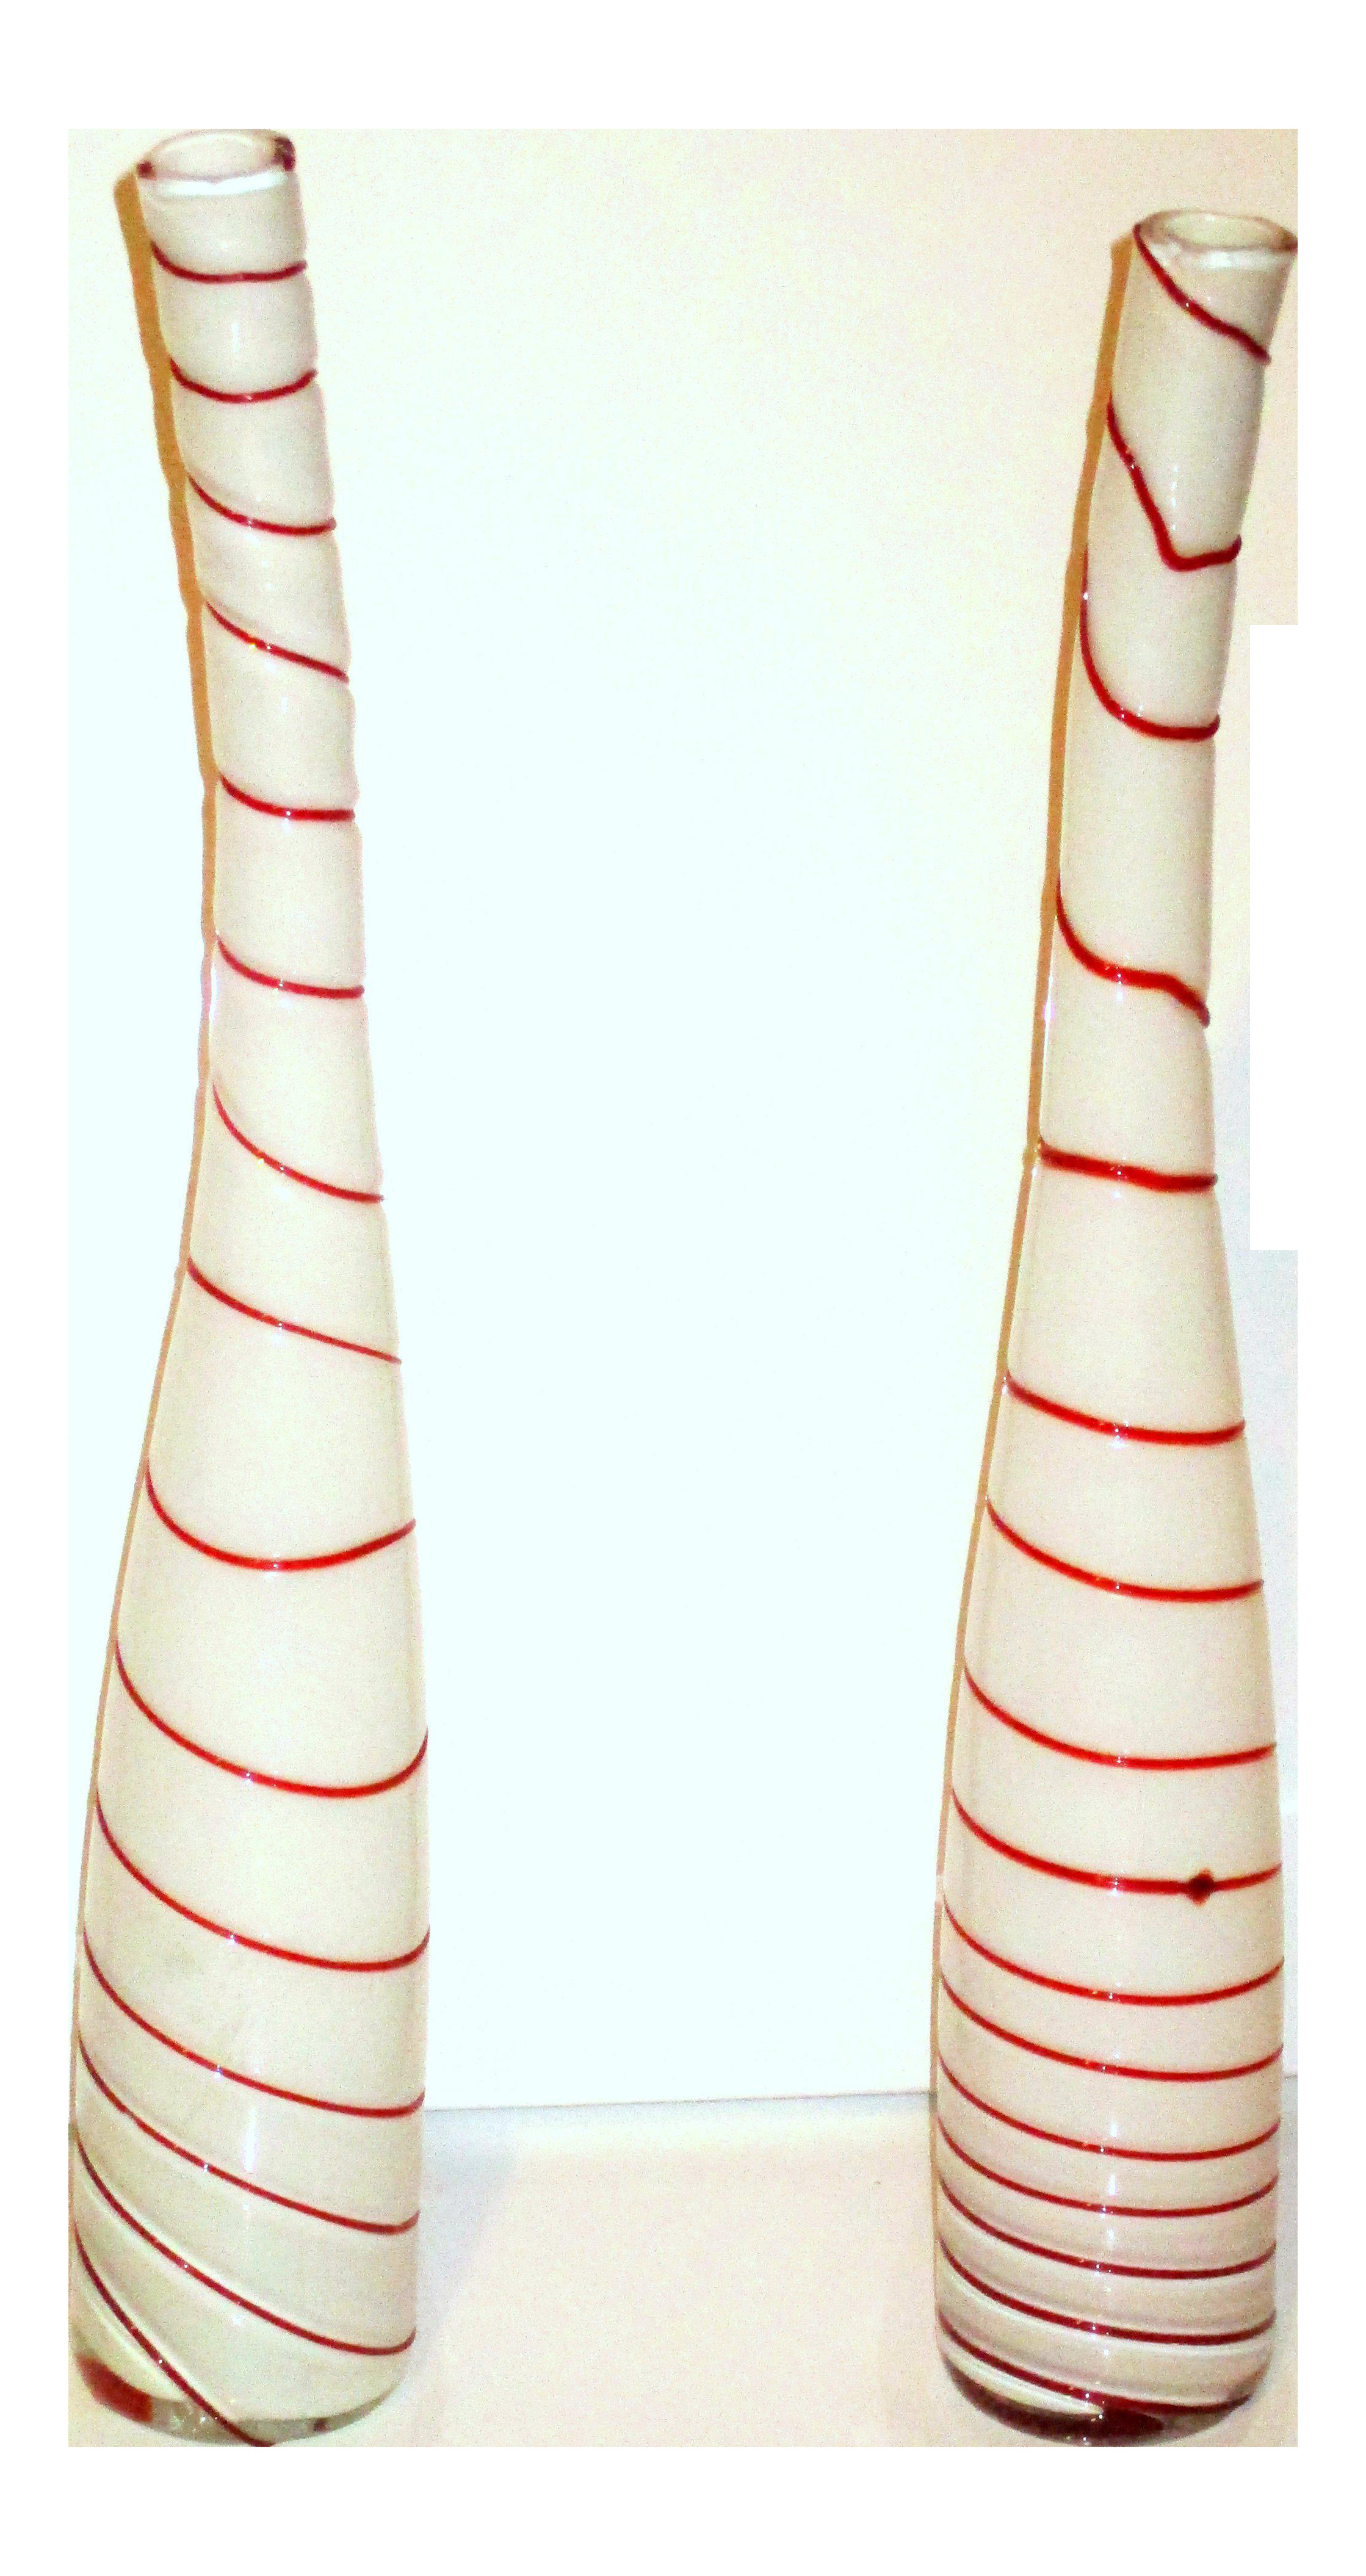 21 attractive Antique Venetian Glass Vases 2024 free download antique venetian glass vases of art glass murano glass striped peppermint white red vases 2 pertaining to art glass murano glass striped peppermint white red vases 2 chairish